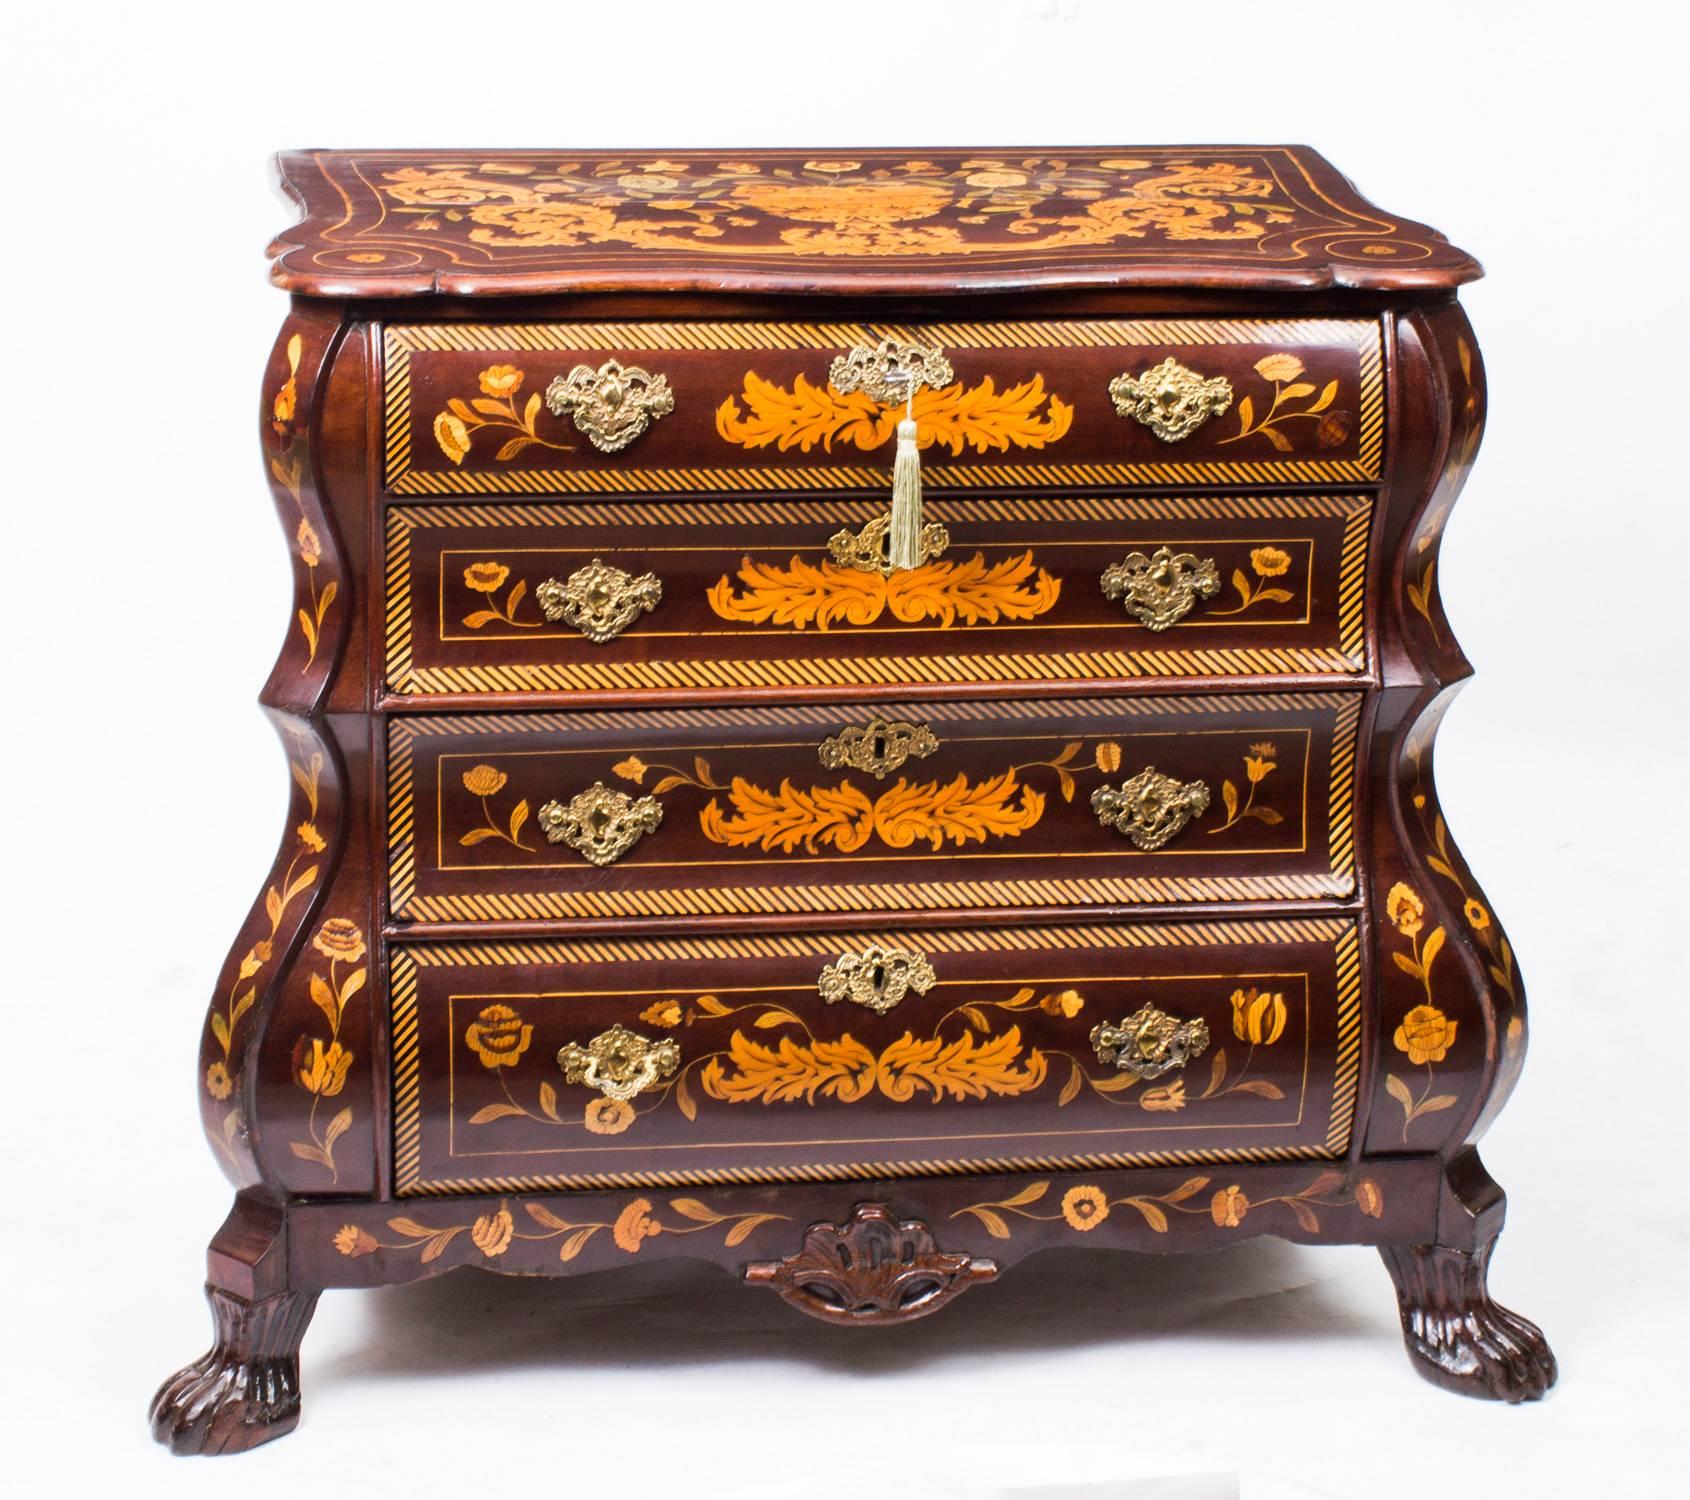 A 19th century Dutch marquetry chest of drawers, four drawers with brass drop handles flanked by canted angles and raised on paw feet. 

This is a stunning antique Dutch bombe' serpentine fronted marquetry chest of drawers, late 18th century in